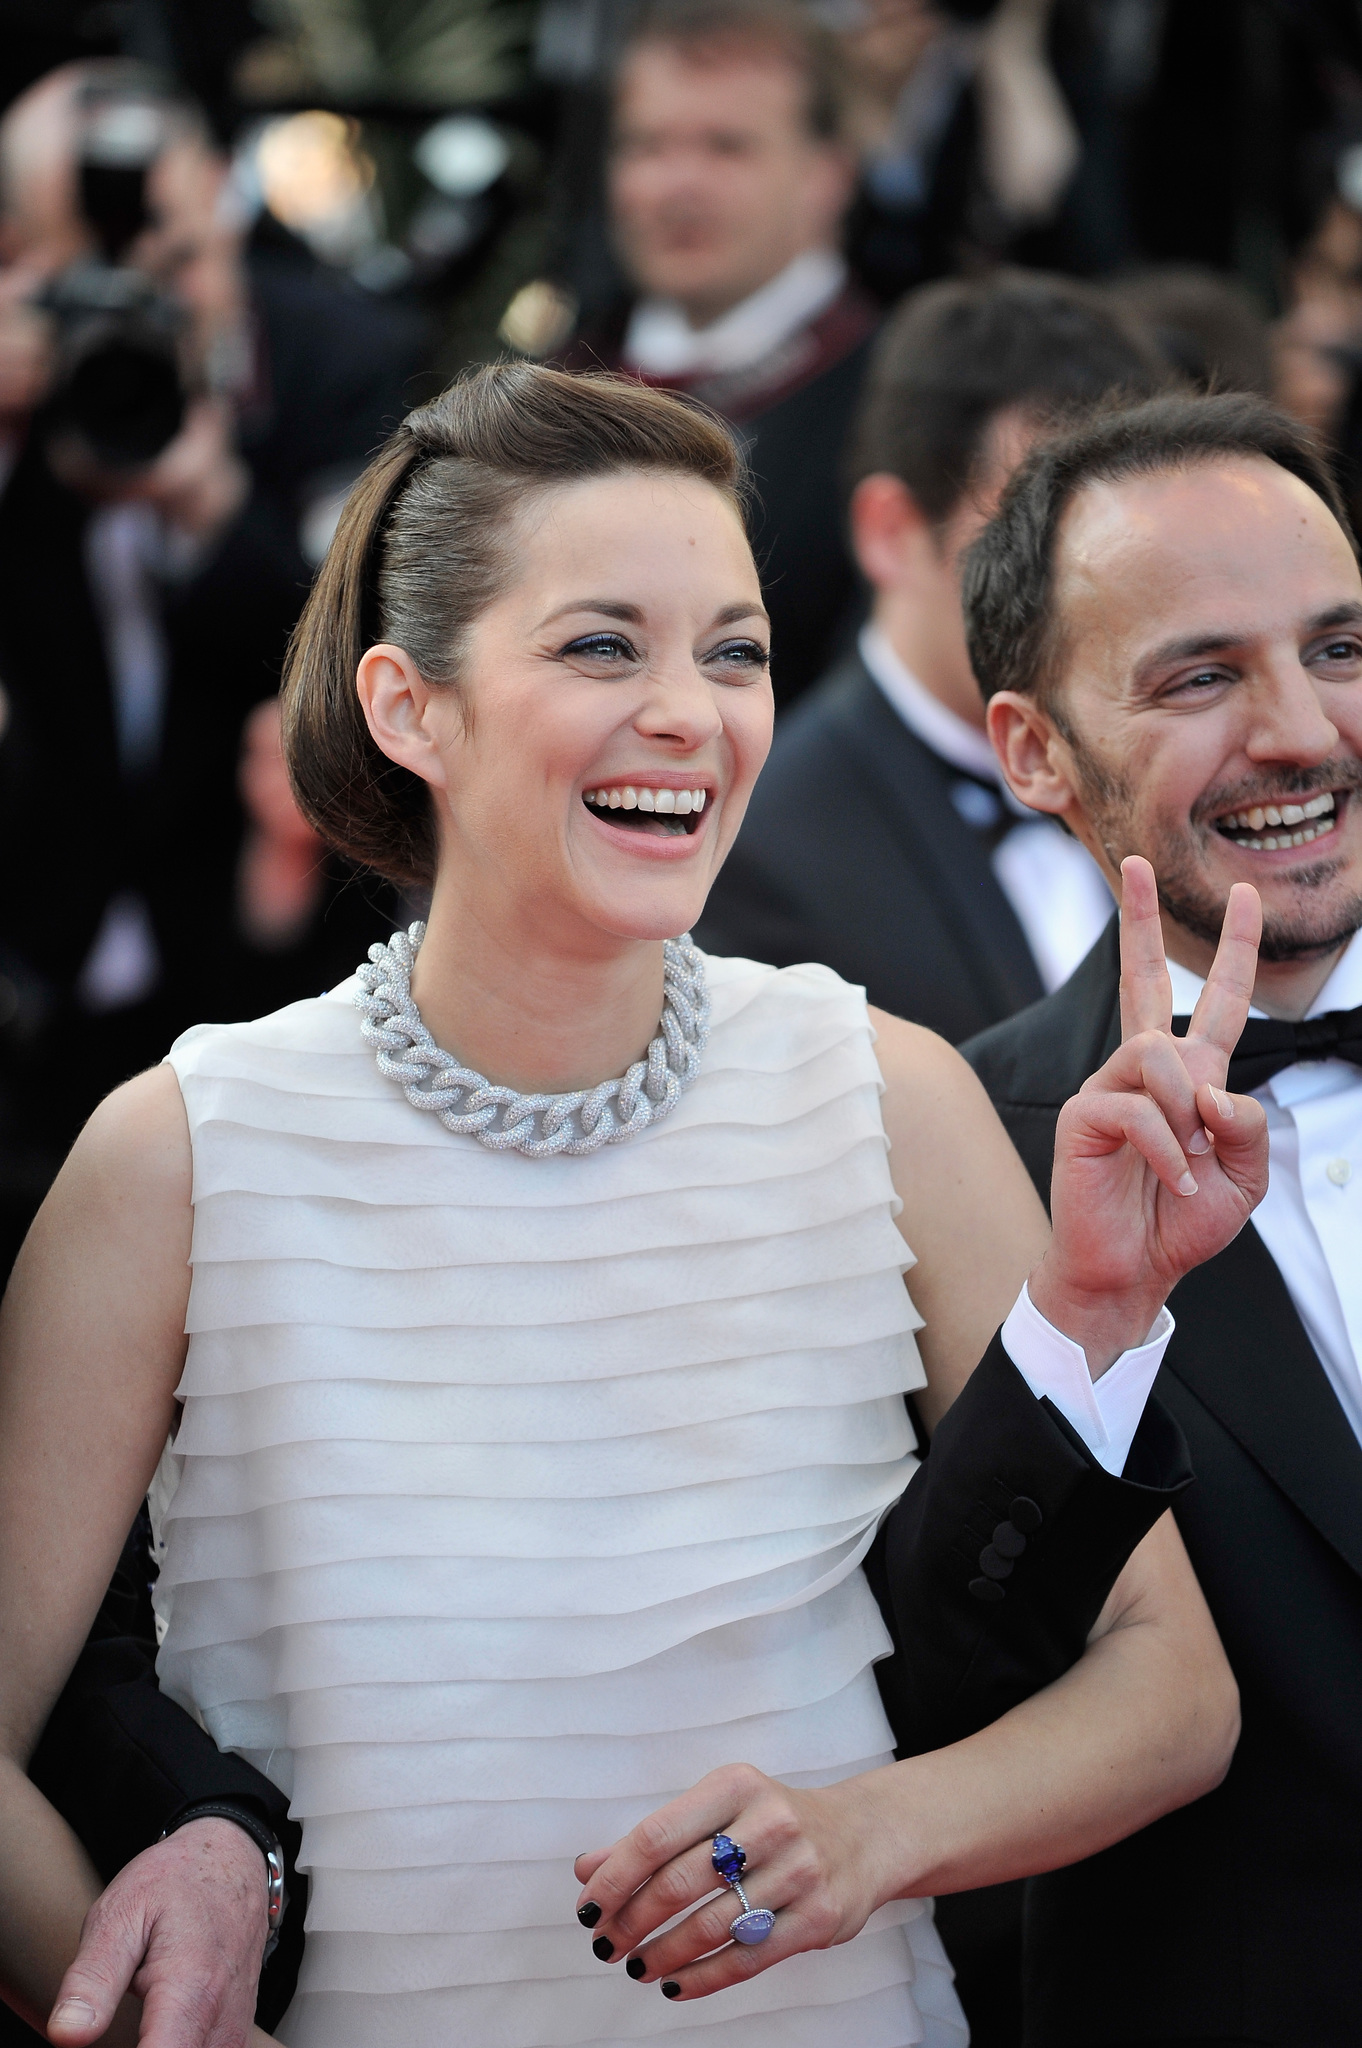 Marion Cotillard and Fabrizio Rongione at event of Deux jours, une nuit (2014)